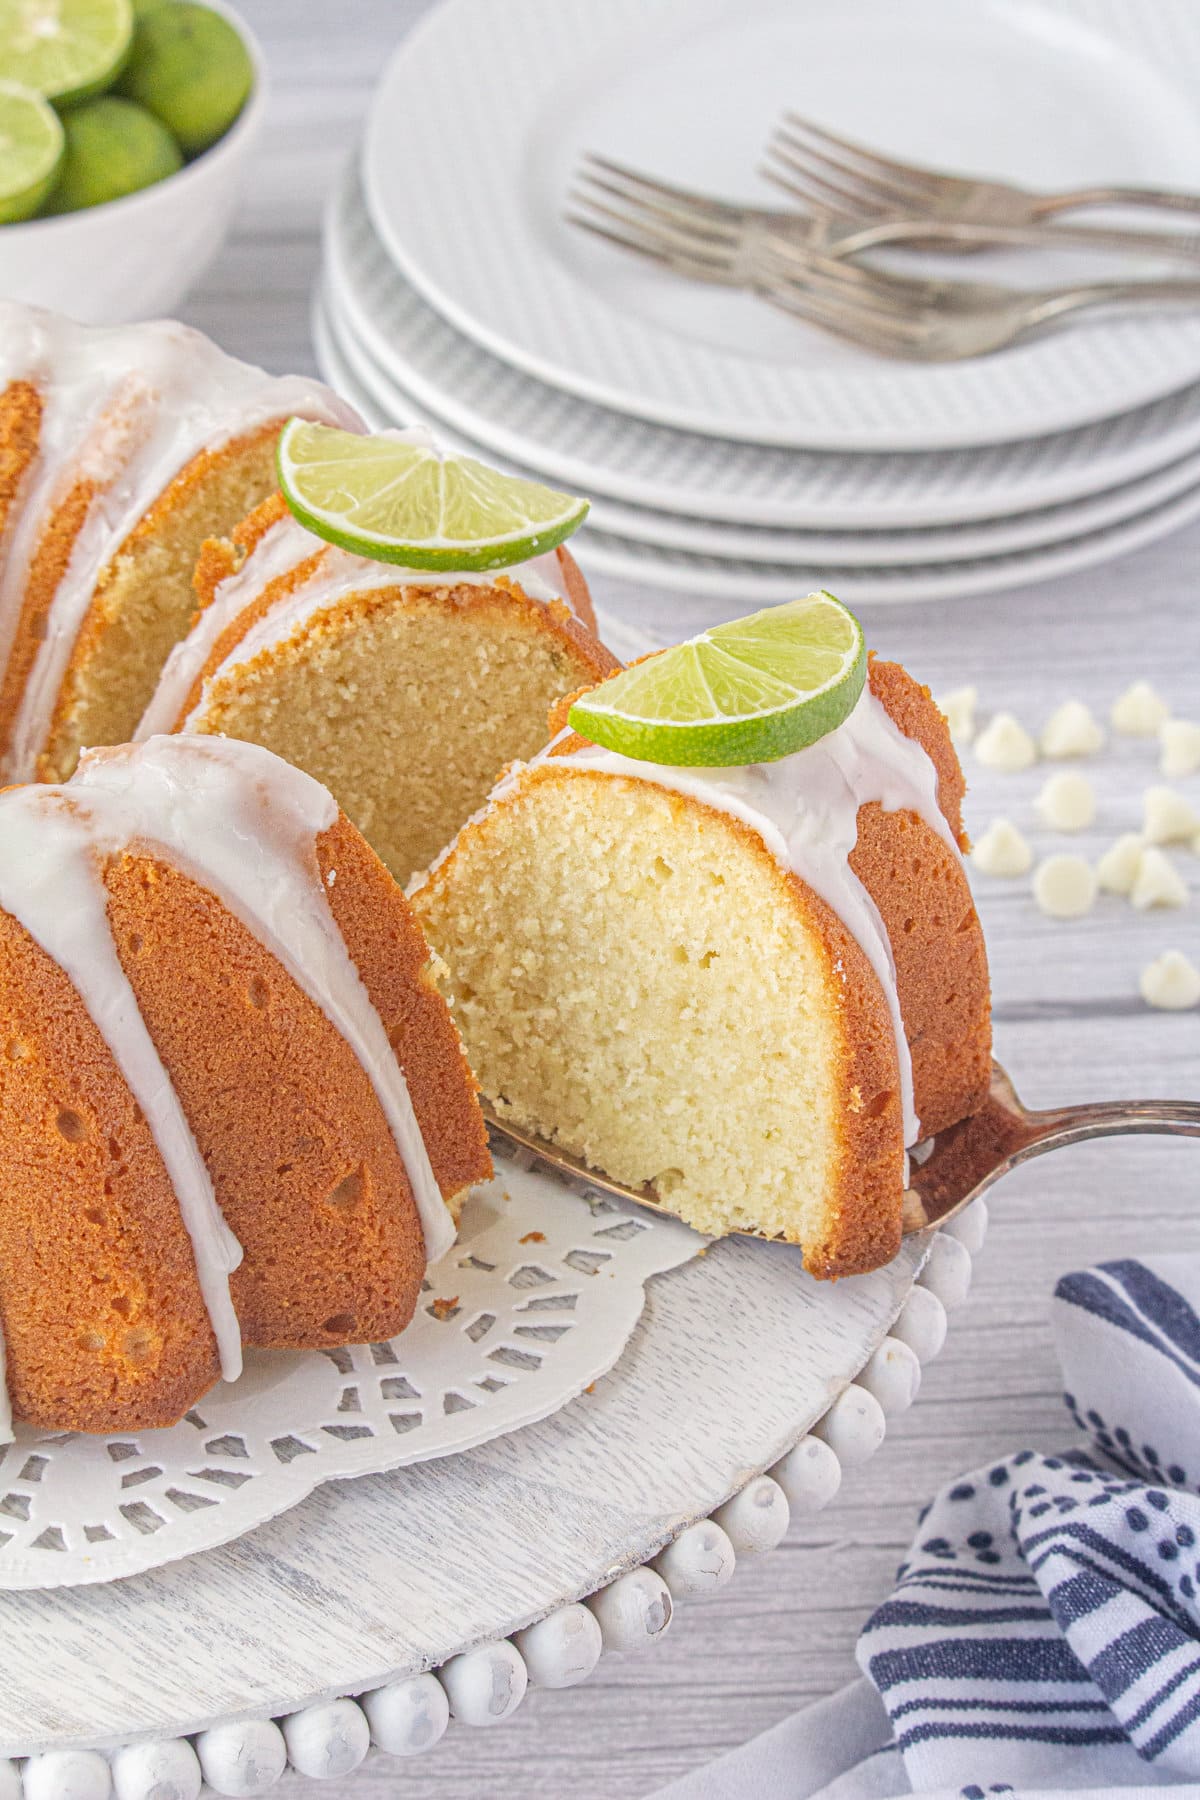 A slice of white chocolate key lime bundt cake on a cake server hovered near the rest of the cake.